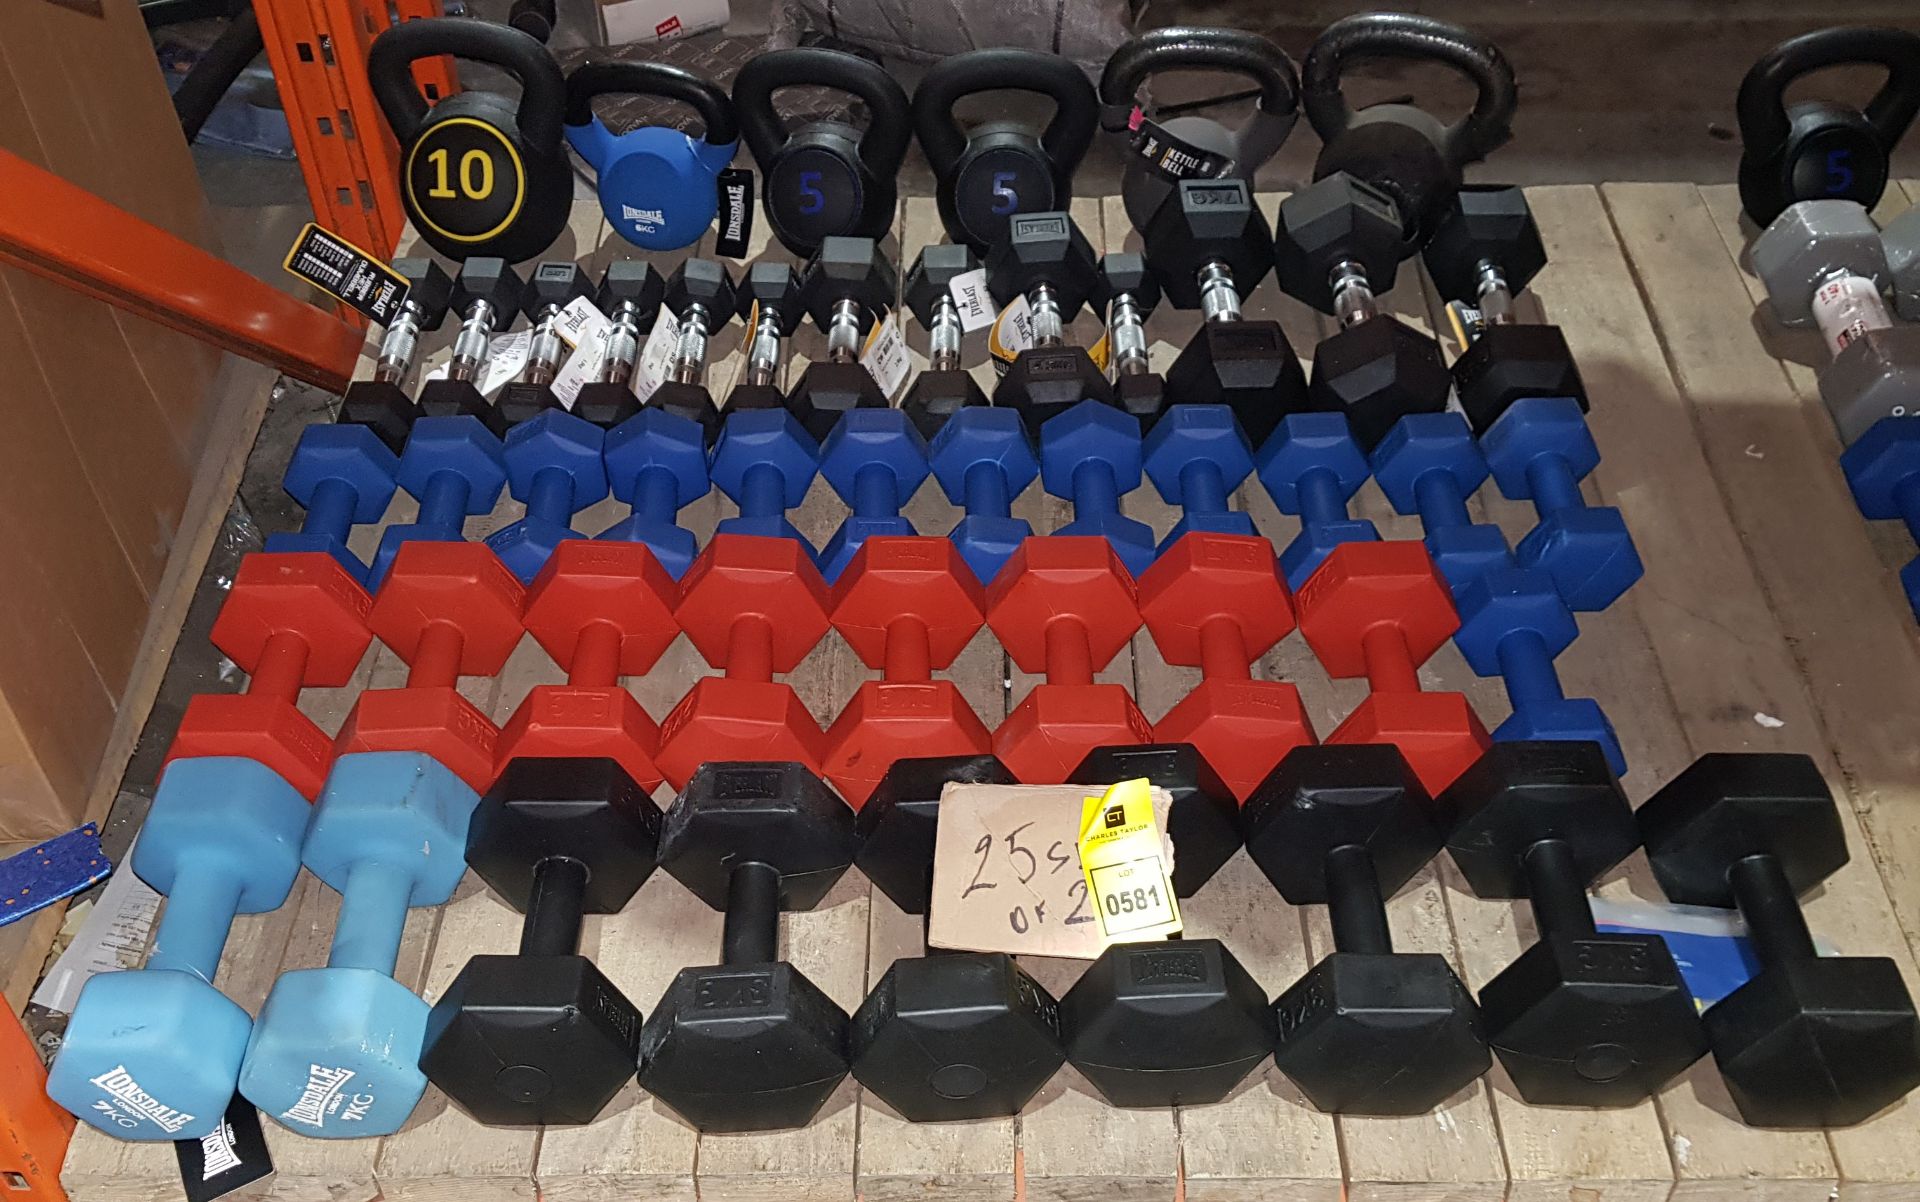 50 PIECE MIXED GYM LOT CONTAINING EVERLAST RUBBER HEX SETS OF 2 DUMBELLS - 1.5 KG / 2.5 KG / 4.5